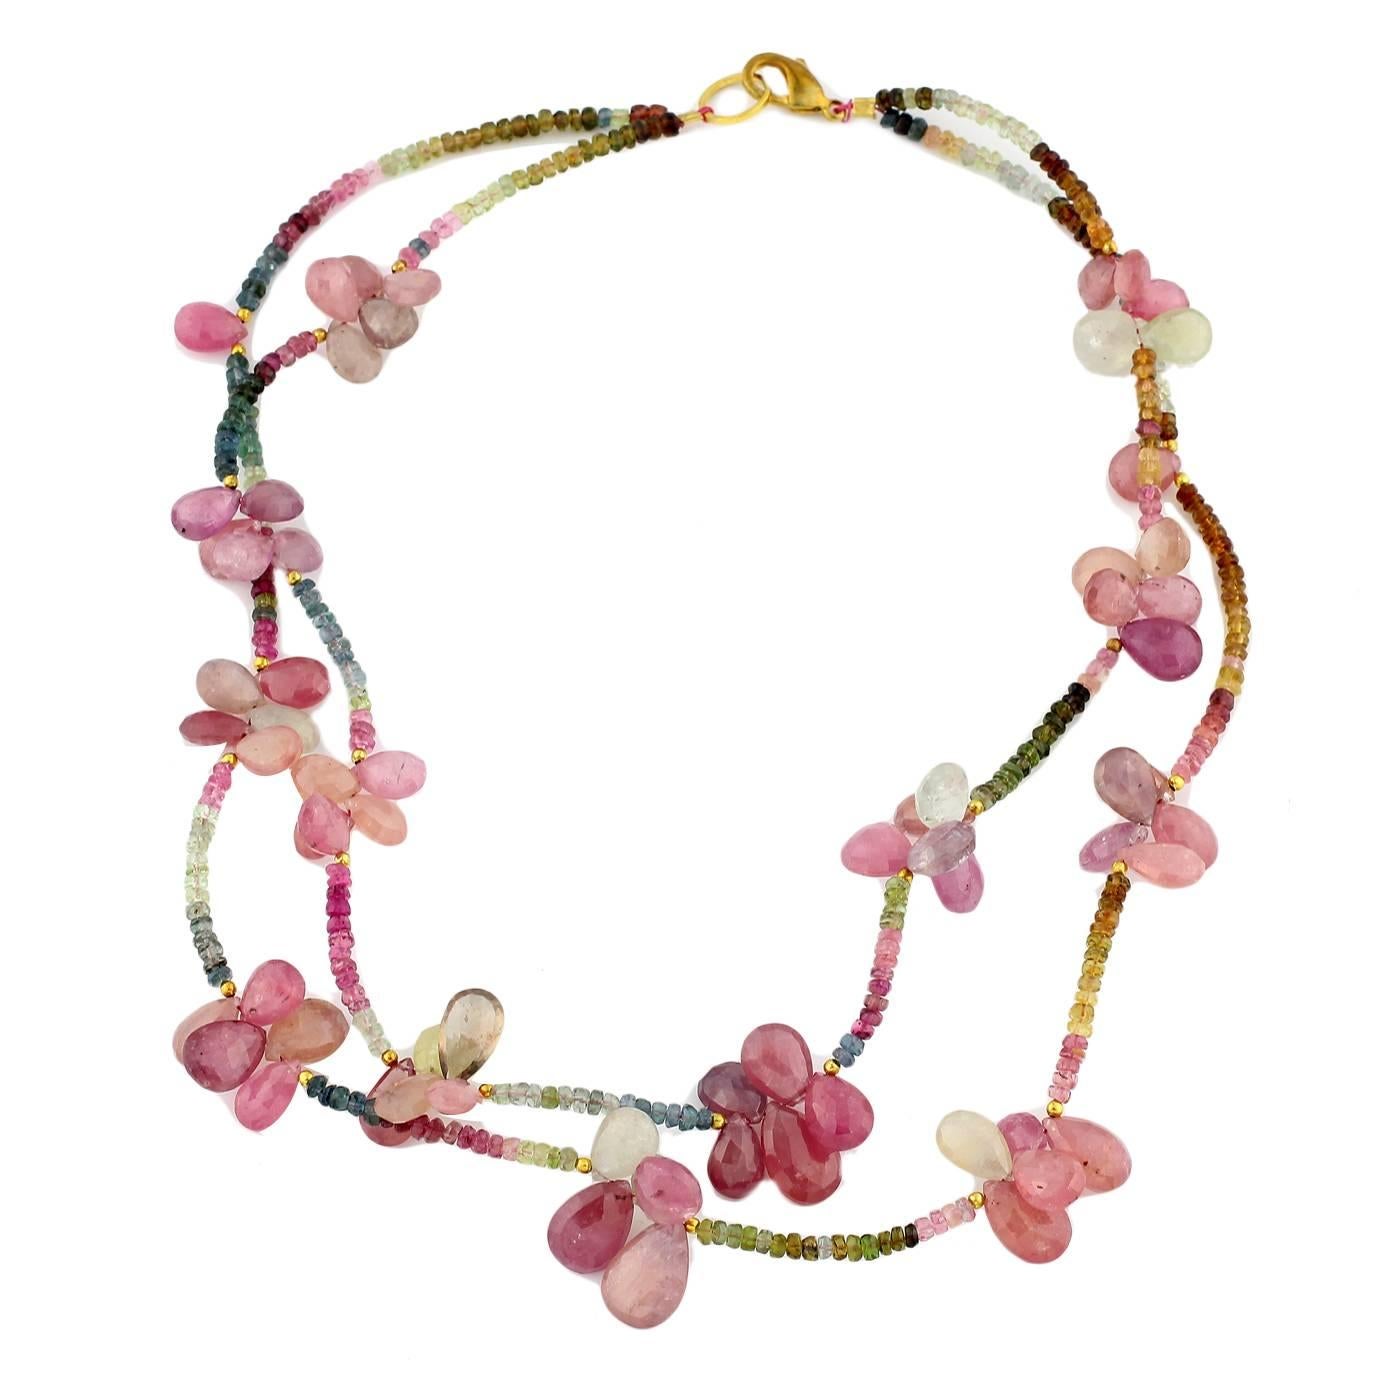 Double Strand "Butterflies" of Red/Pink Sapphires on Sapphire Choker Necklace